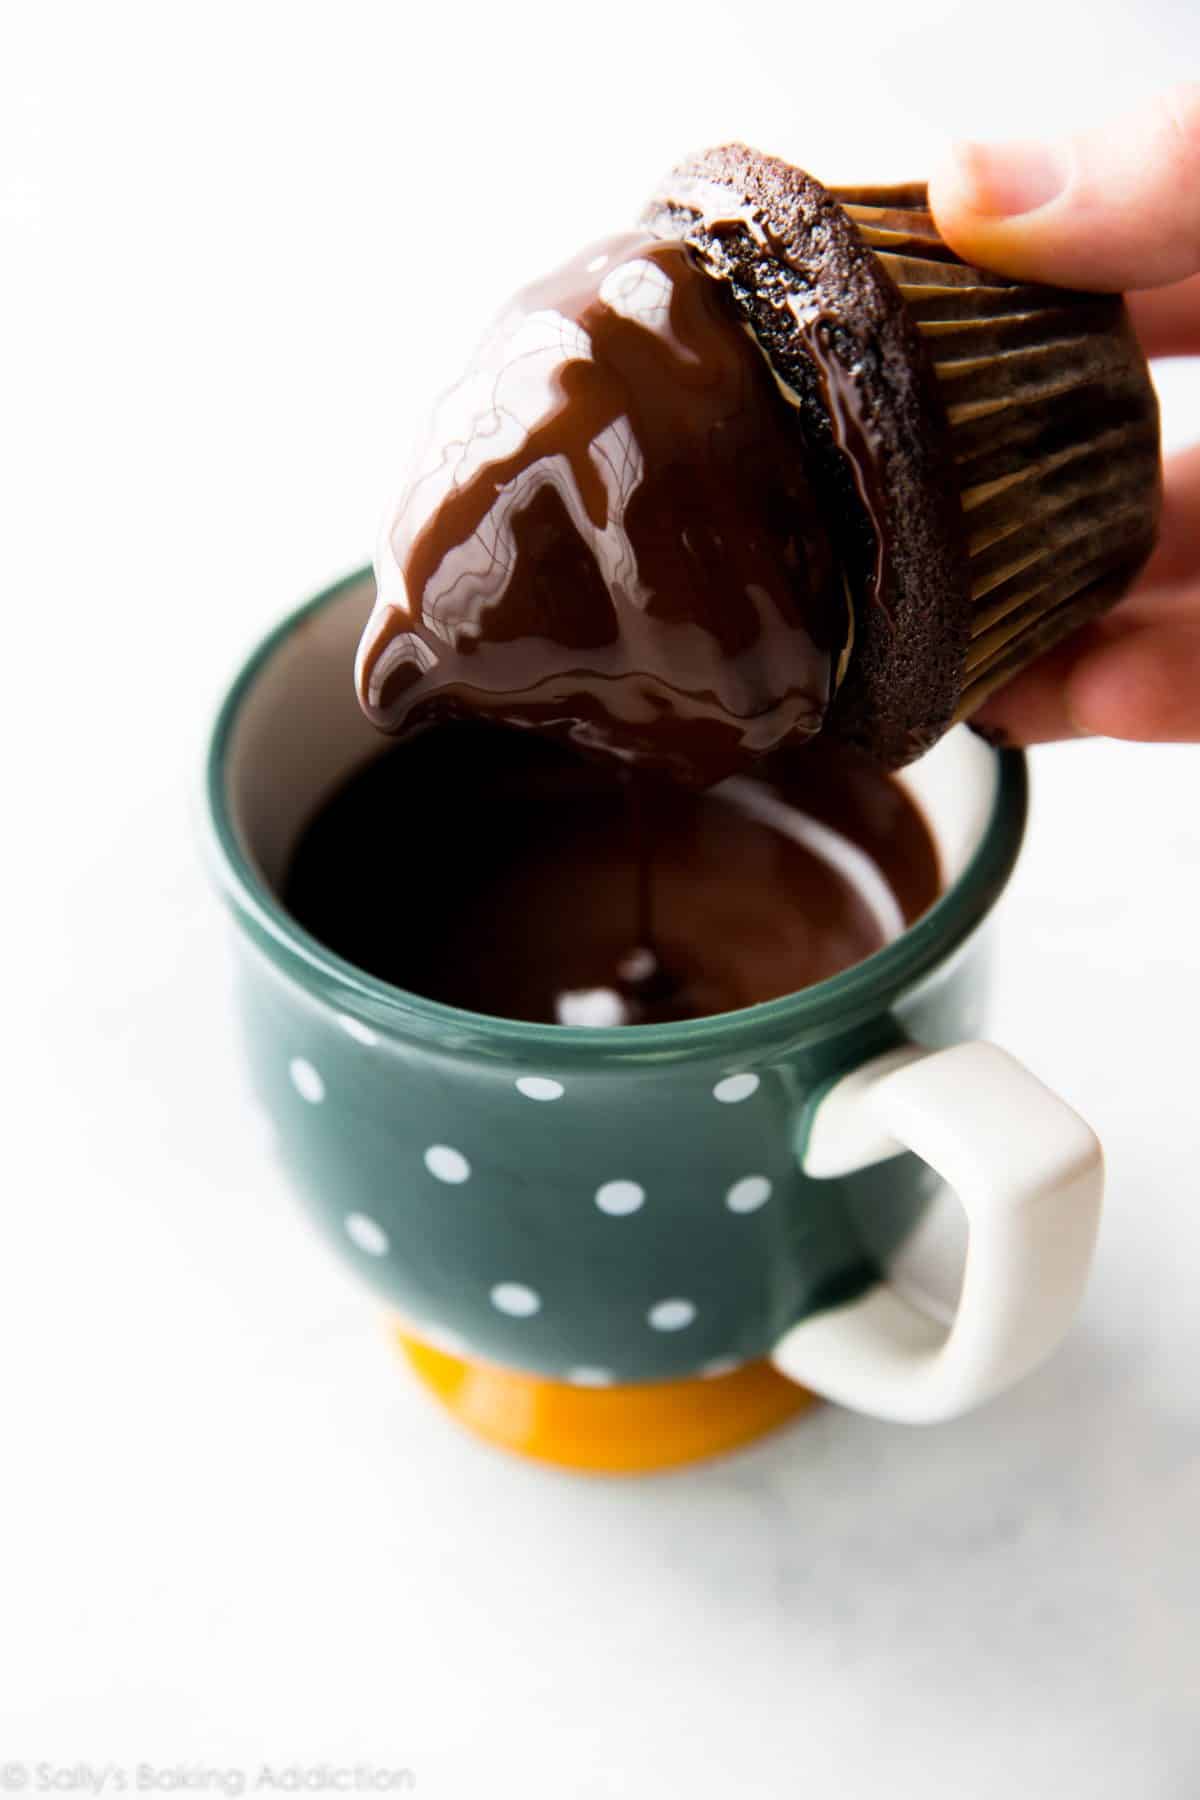 hands dunking a chocolate cupcake with peanut butter frosting into a mug of chocolate coating